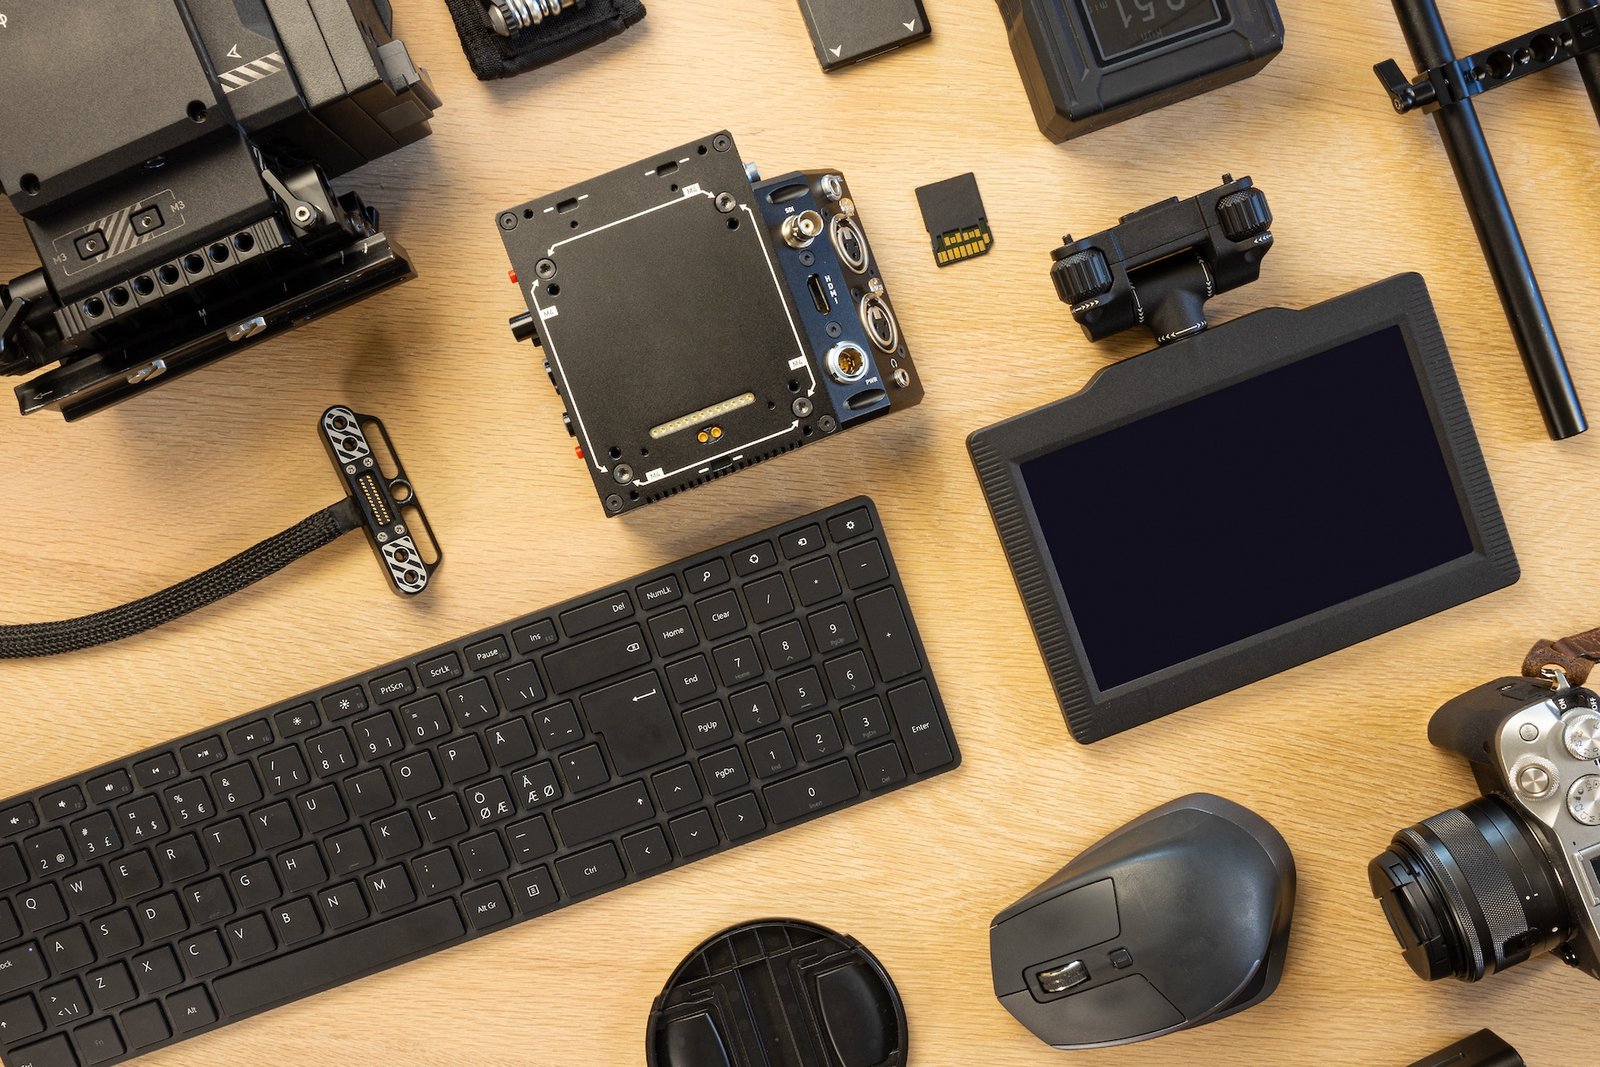 Flat lay of filming equipment with keyboard and mouse. Overhead view of video camera with computer parts on table. Directly above shot of various accessories arranged on surface.